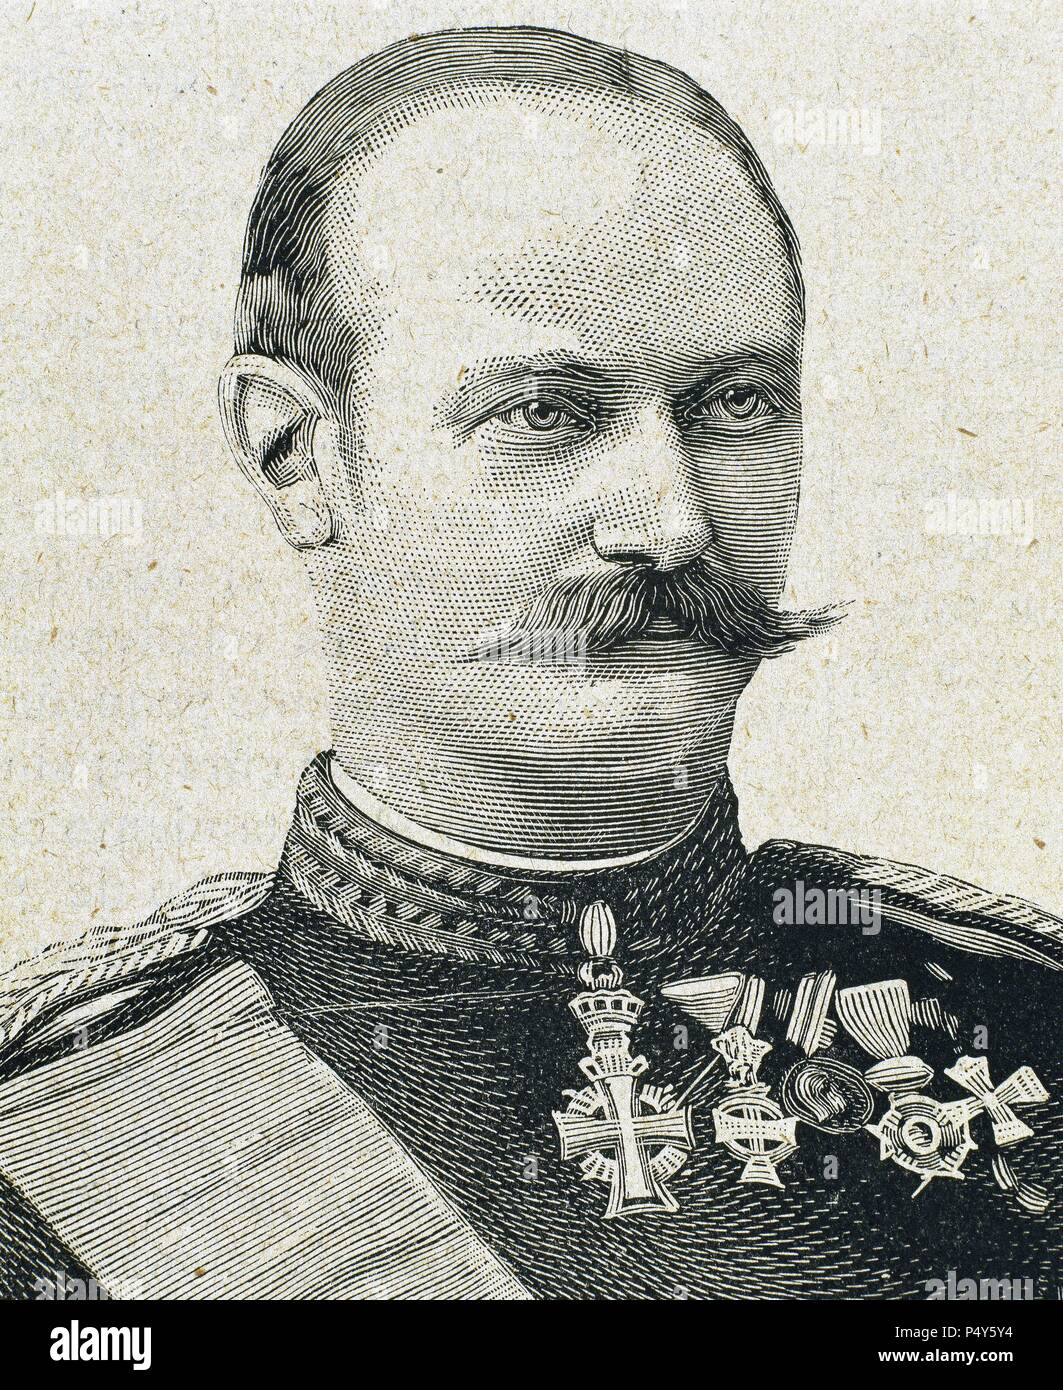 Frederick VIII (Christian Frederik Vilhelm Carl) (1843-1912). King of the Kingdom of Denmark from 1906 to 1912. The second Danish monarch of the House of Glucksburg. Portrait. Engraving. Stock Photo